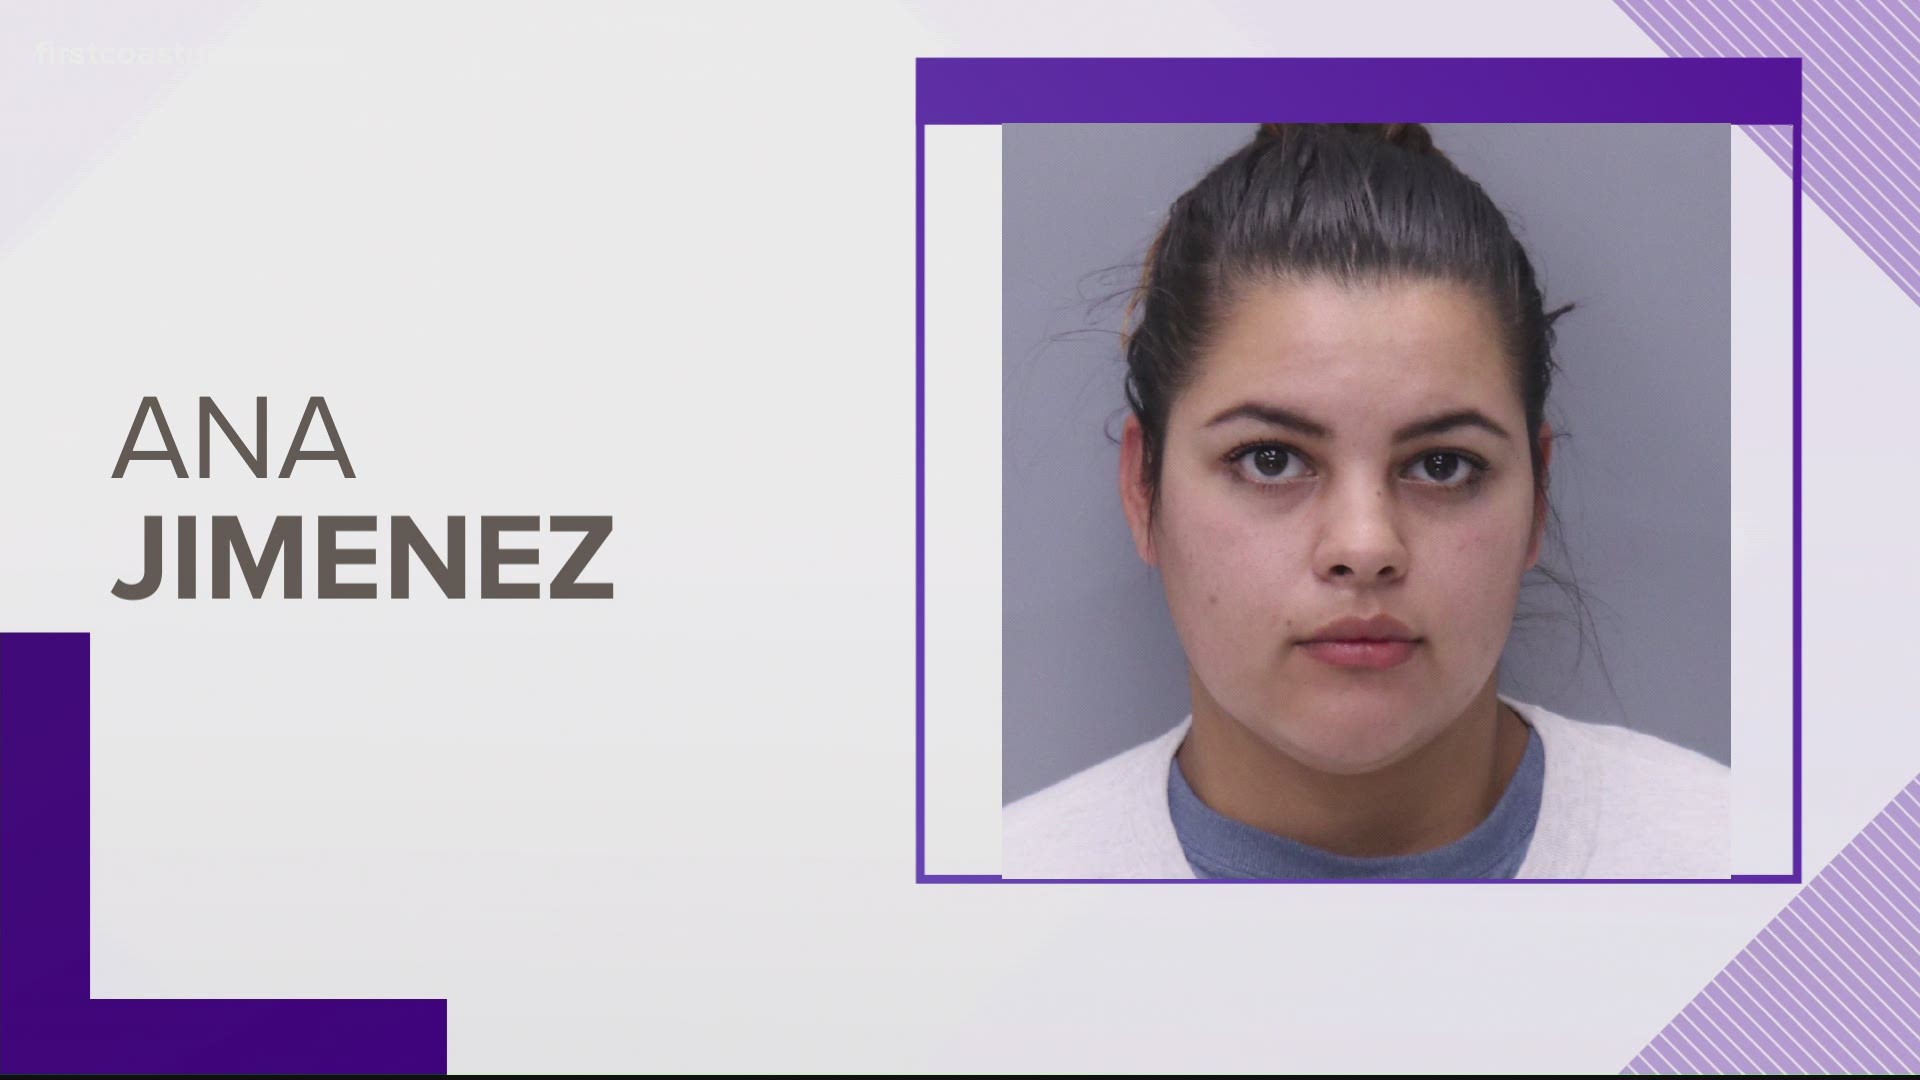 The Florida Highway Patrol arrested Ana Jimenez on charges of second-degree murder, vehicular homicide and reckless driving for fatal six-car collision.